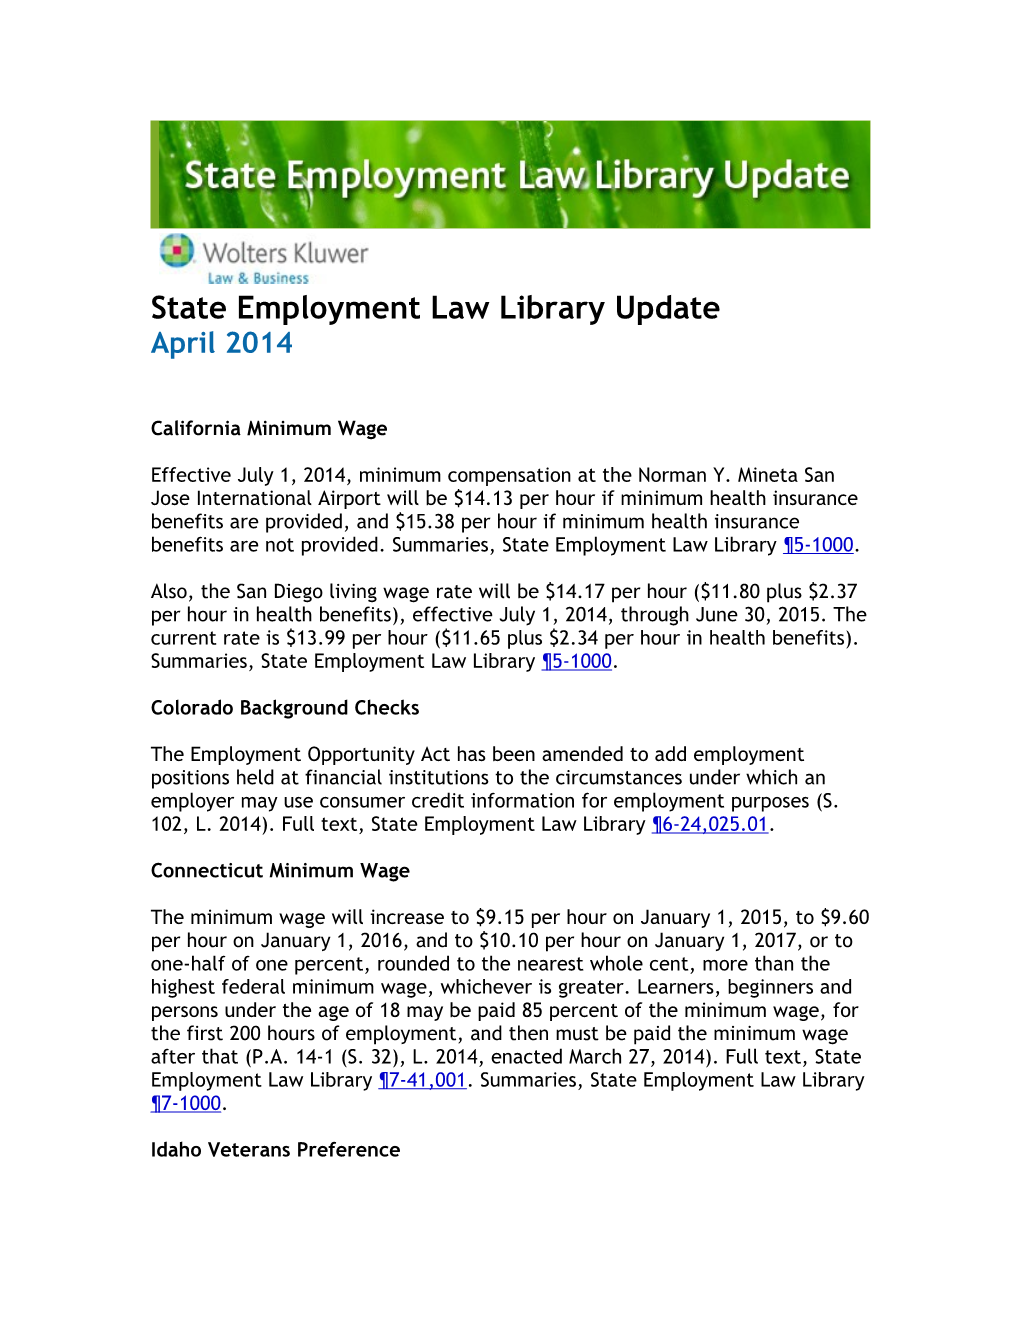 State Employment Law Library Update s1